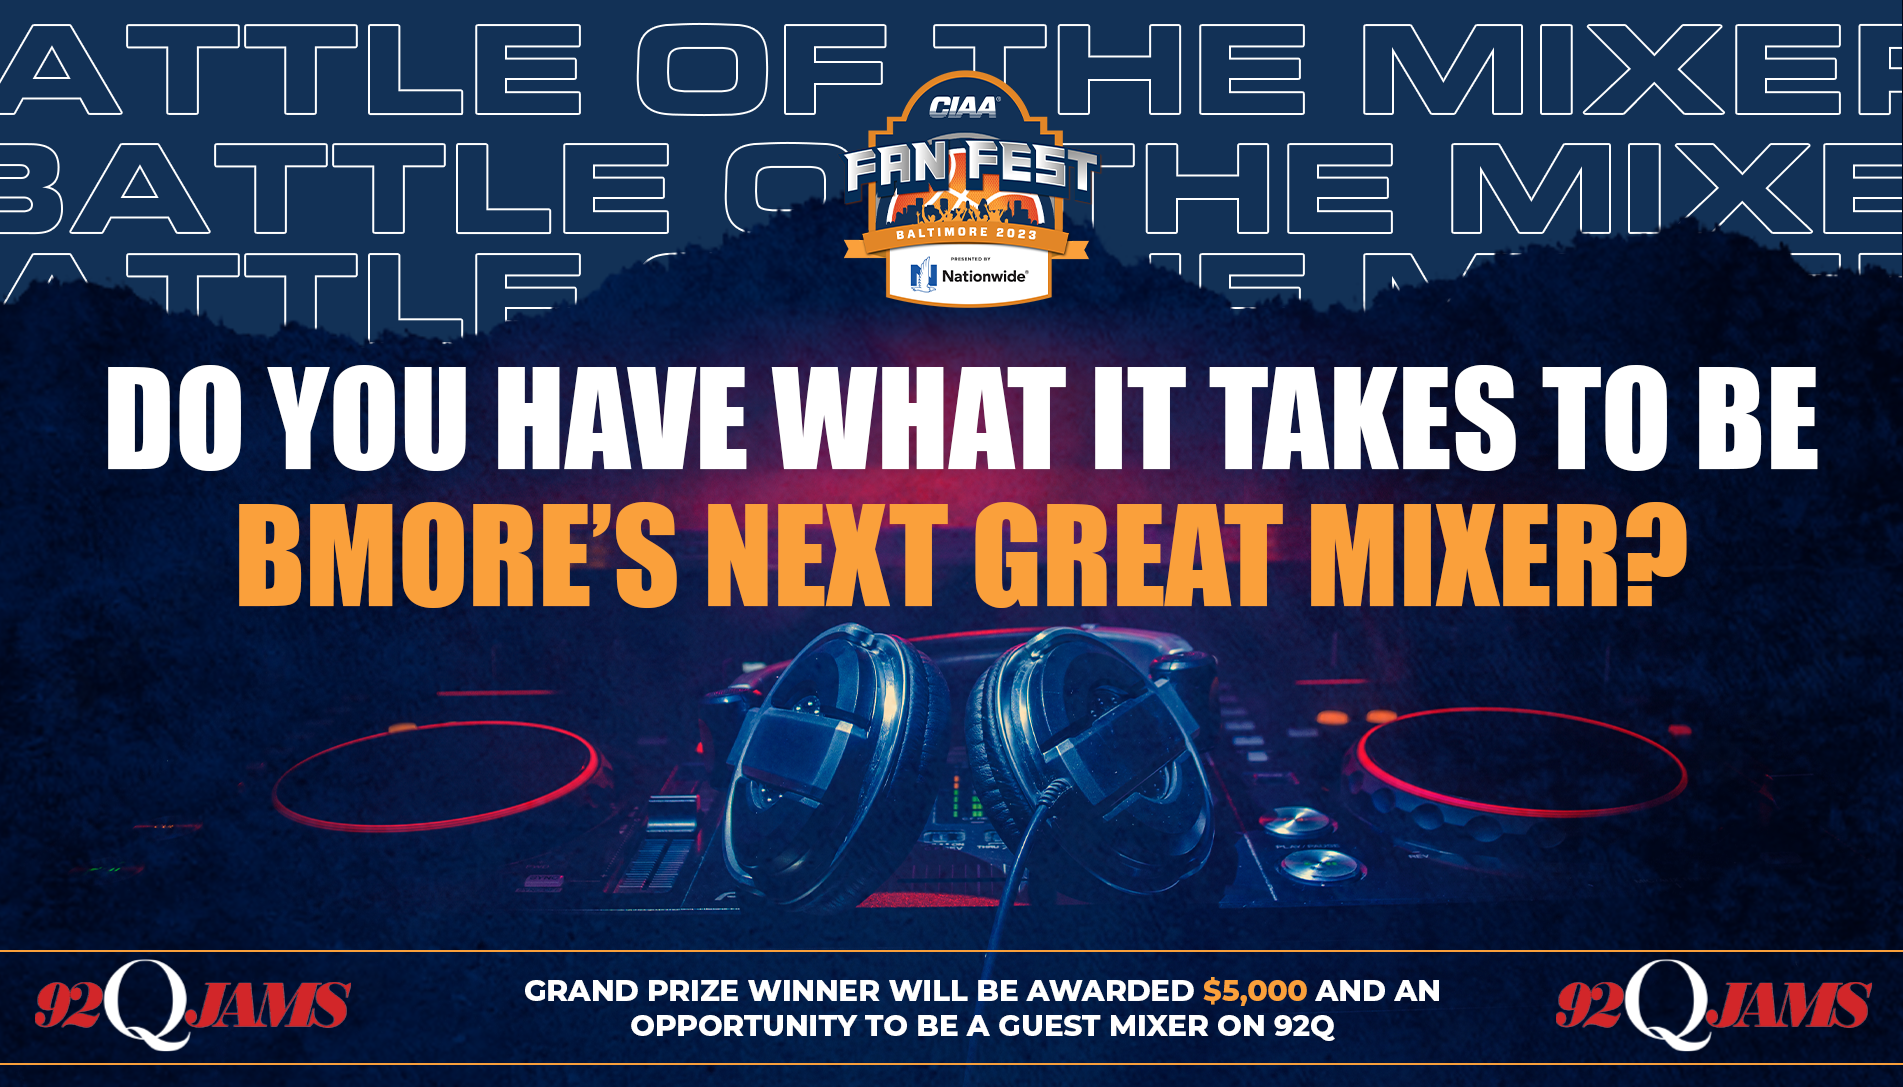 CIAA and 92Q Battle of the Mixers Contest